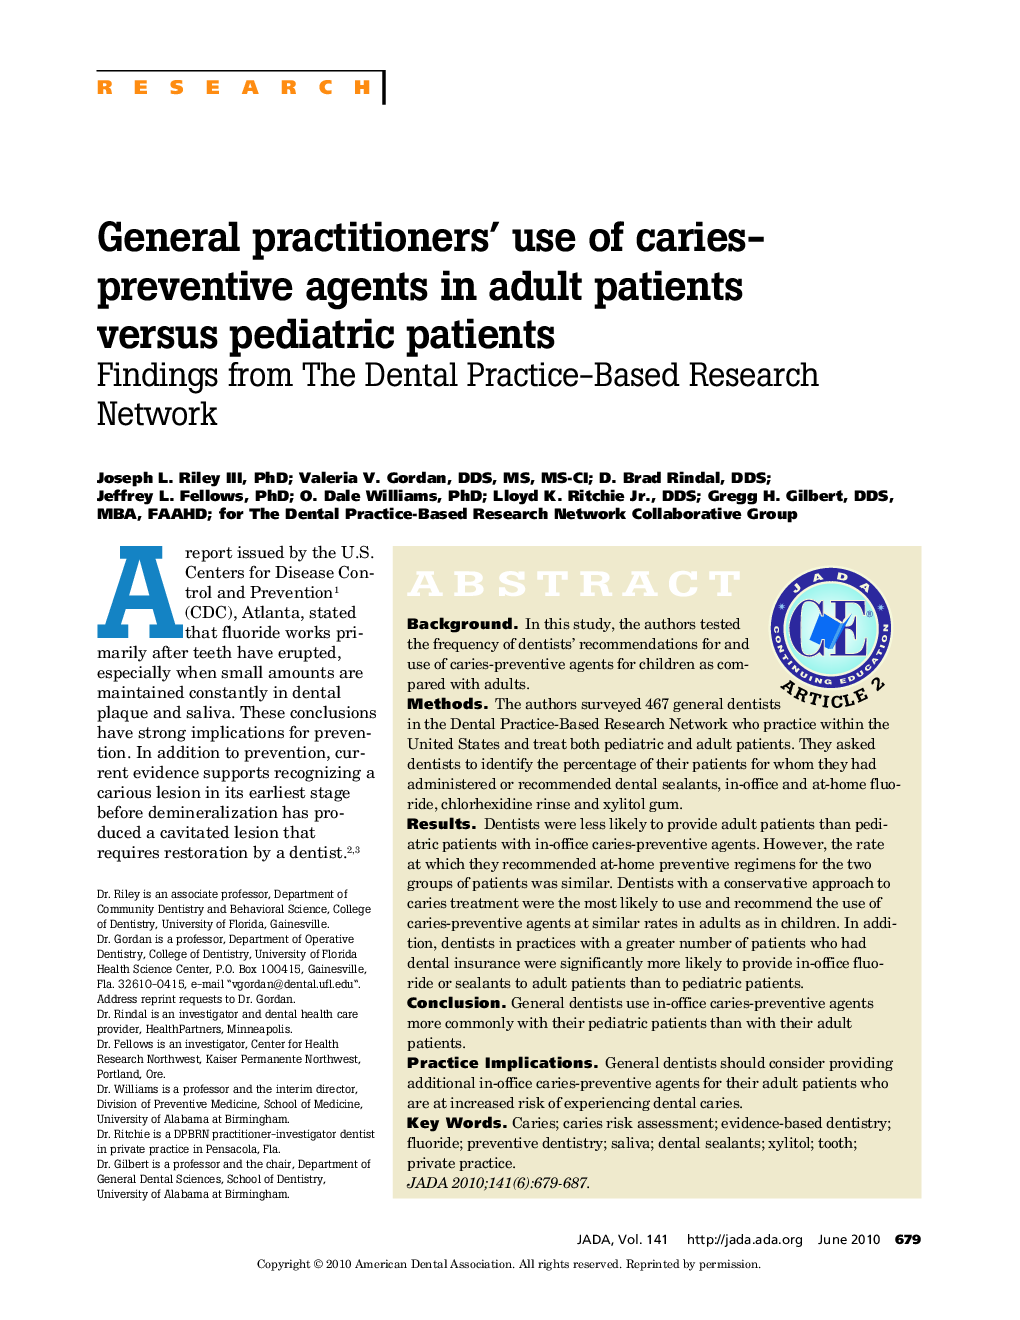 General Practitioners' Use of Caries-Preventive Agents in Adult Patients Versus Pediatric Patients : Findings from The Dental Practice-Based Research Network